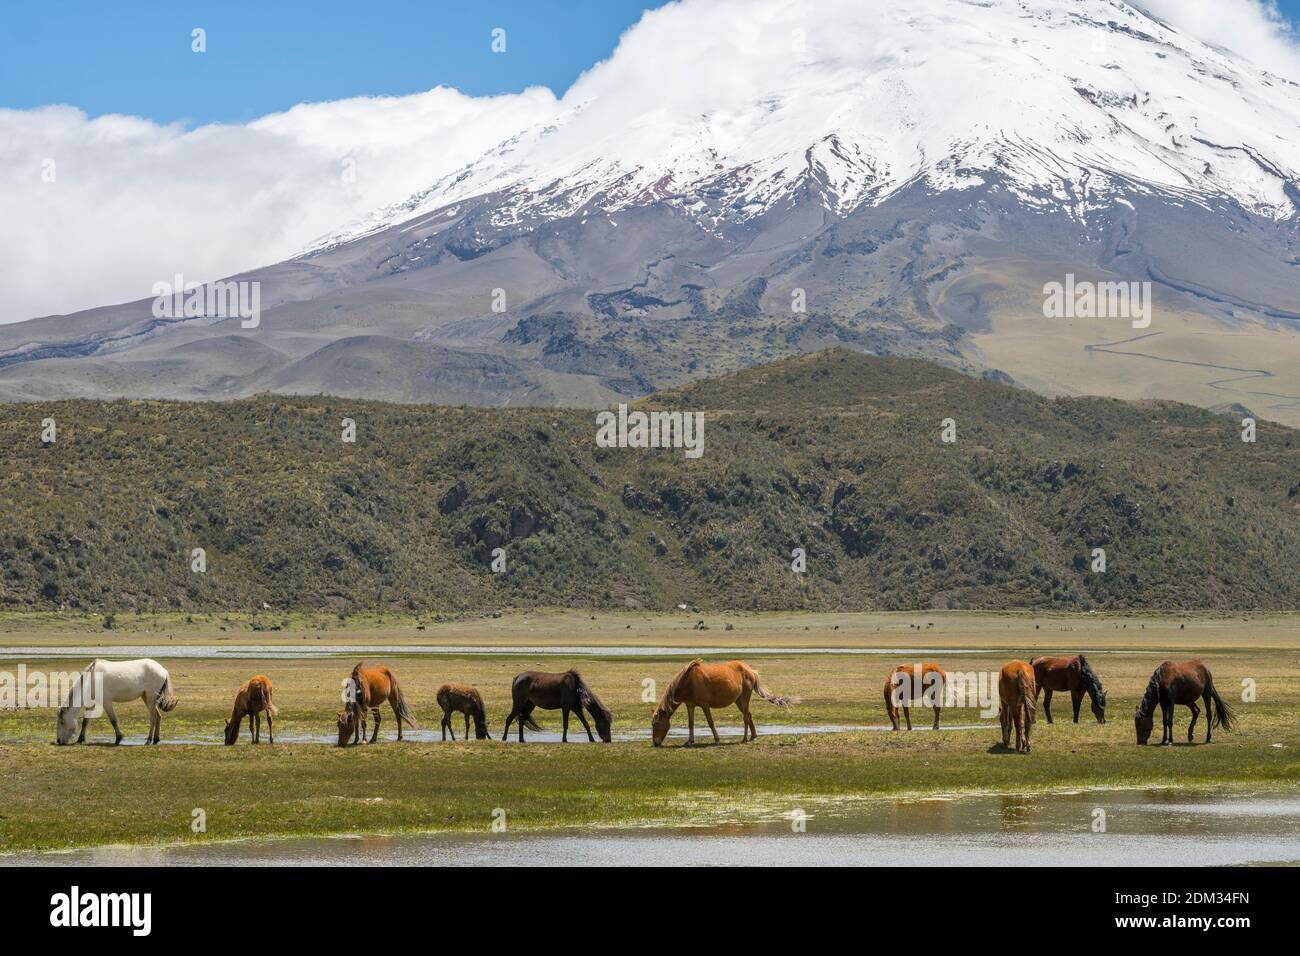 The snowcapped Cotopaxi Volcano with wild horses in the foreground. Cotopaxi National Park in the Ecuadorian Andes. Stock Photo